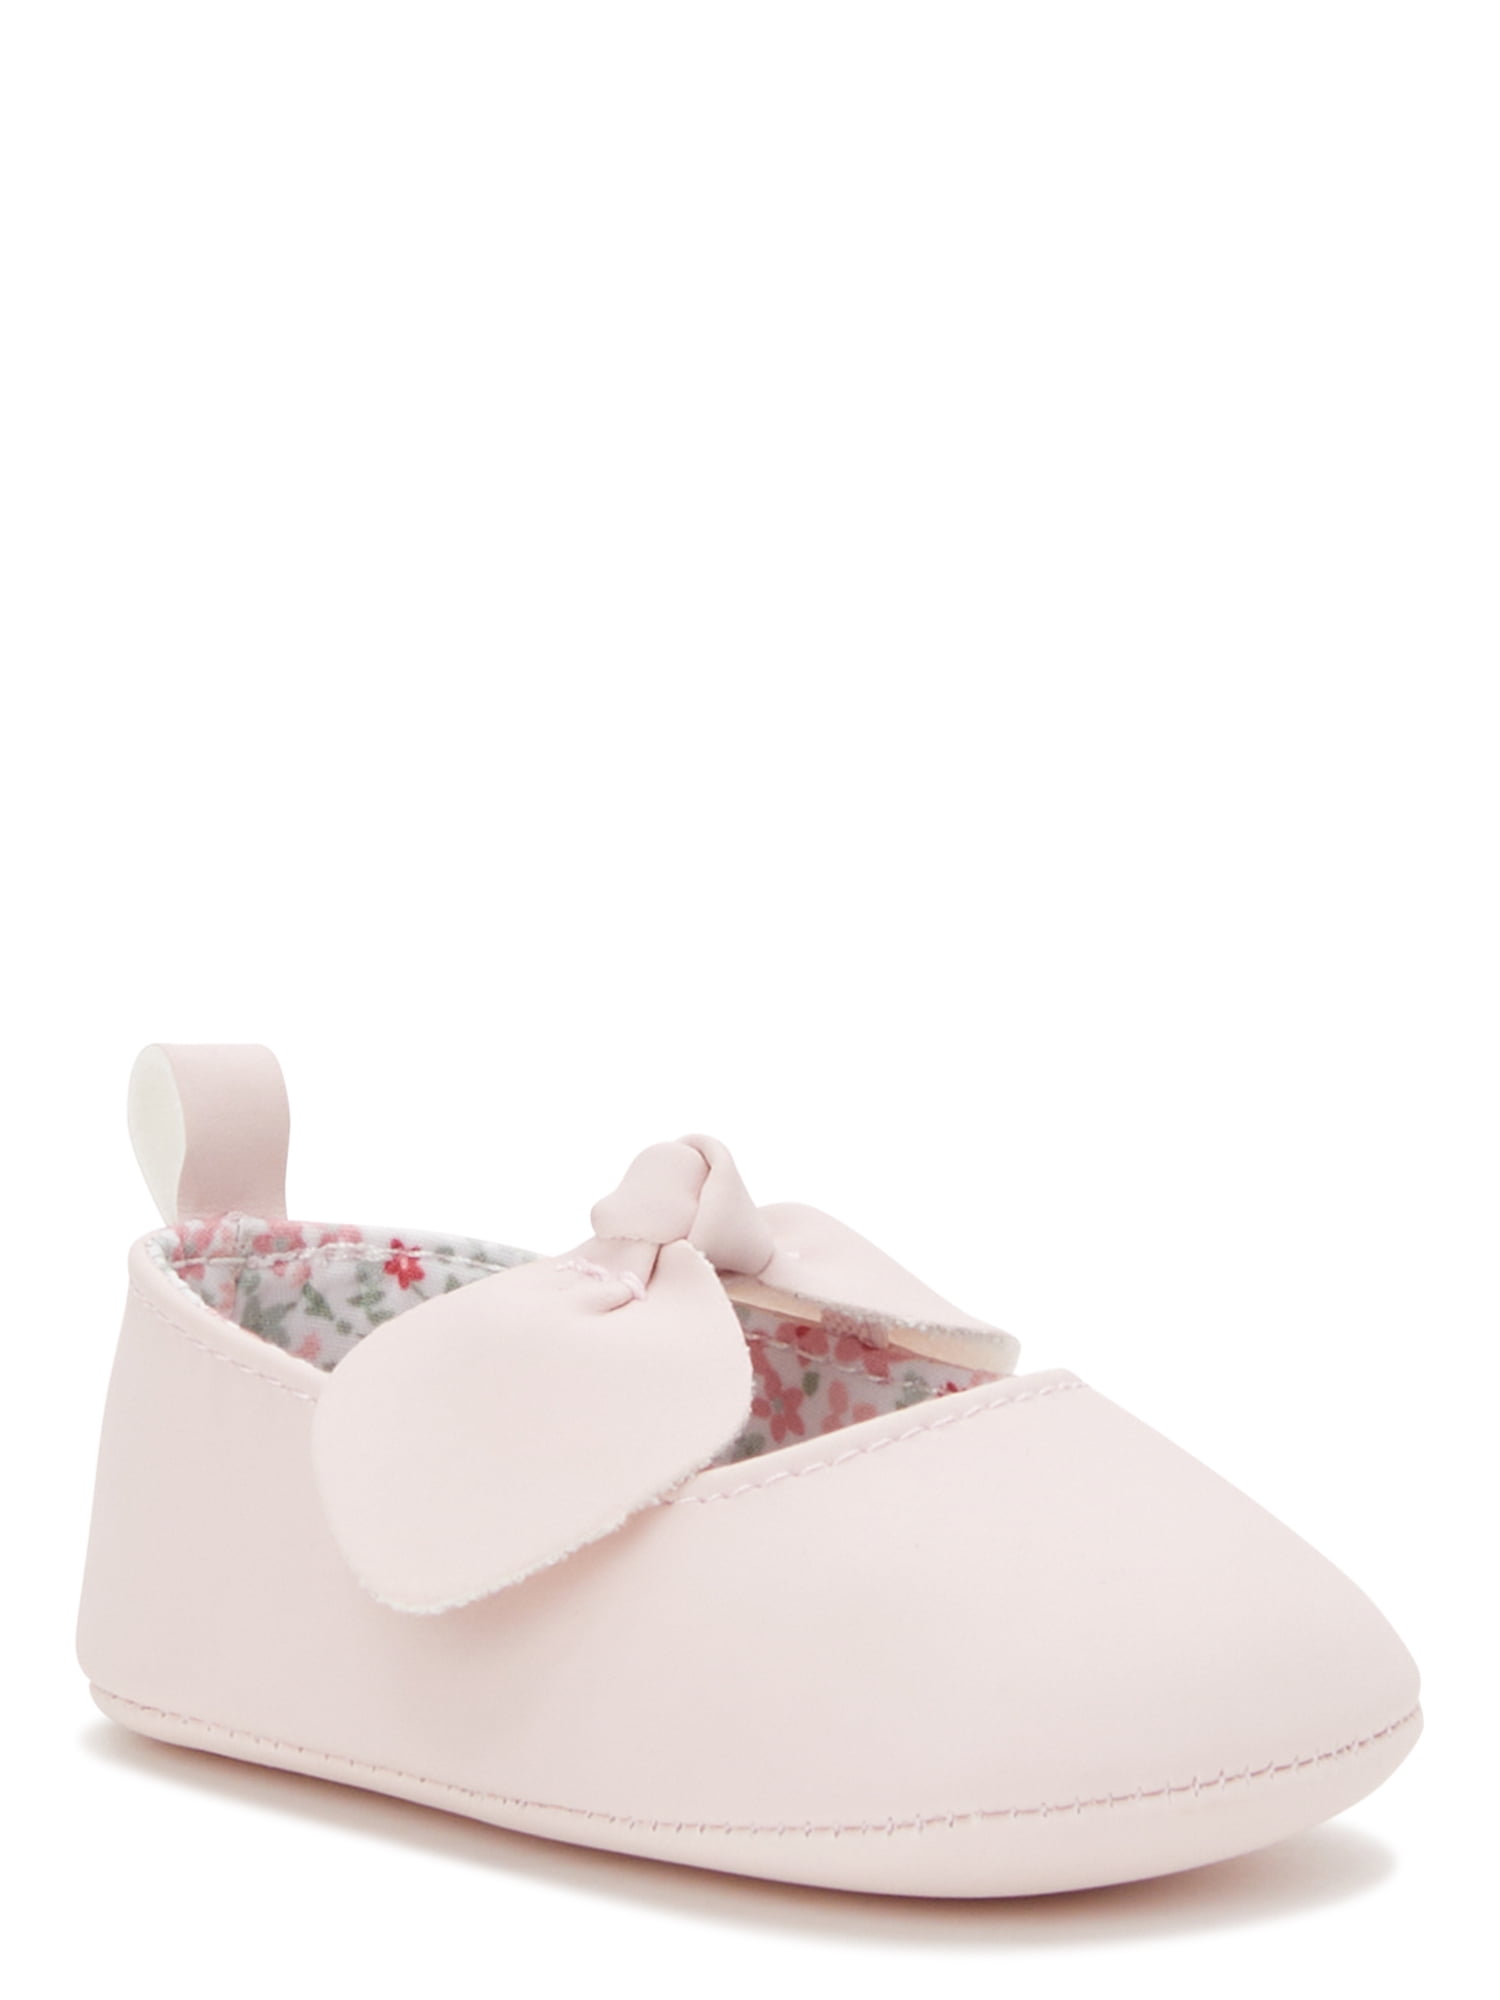 Carter's Child of Mine Baby Girls Bow Ballet Flats, Sizes 0-6 Months